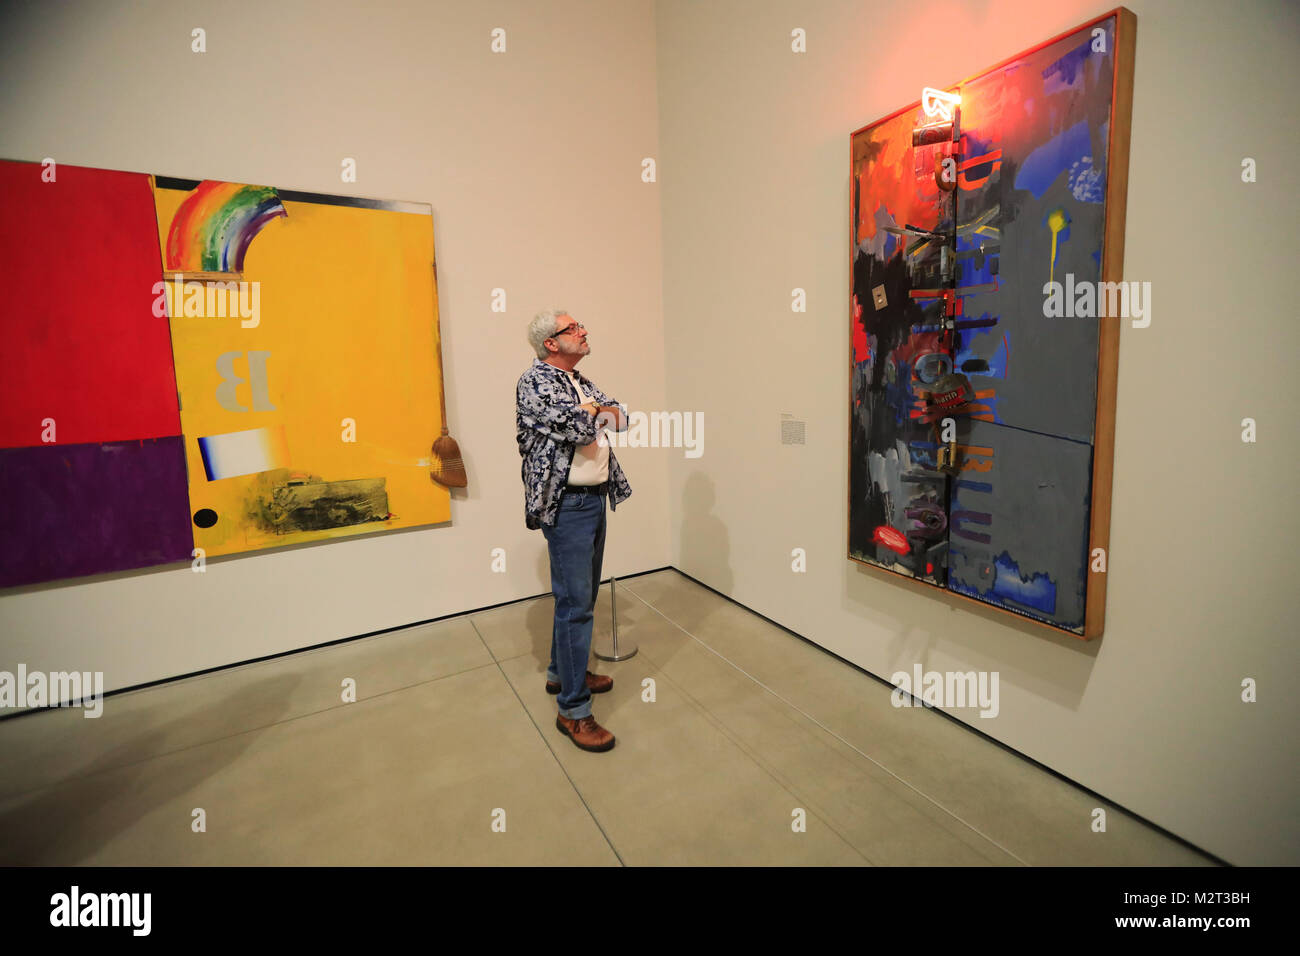 (180208) -- LOS ANGELES, Feb. 8, 2018 (Xinhua) -- A man visits the preview of an exhibition entitled 'Something Resembling Truth' showcasing Jasper Johns' art works in Los Angeles, the United States, Feb. 7, 2018. The exhibition will open to the public from Feb. 10 to May 13. (Xinhua/Li Ying)(jmmn) Stock Photo